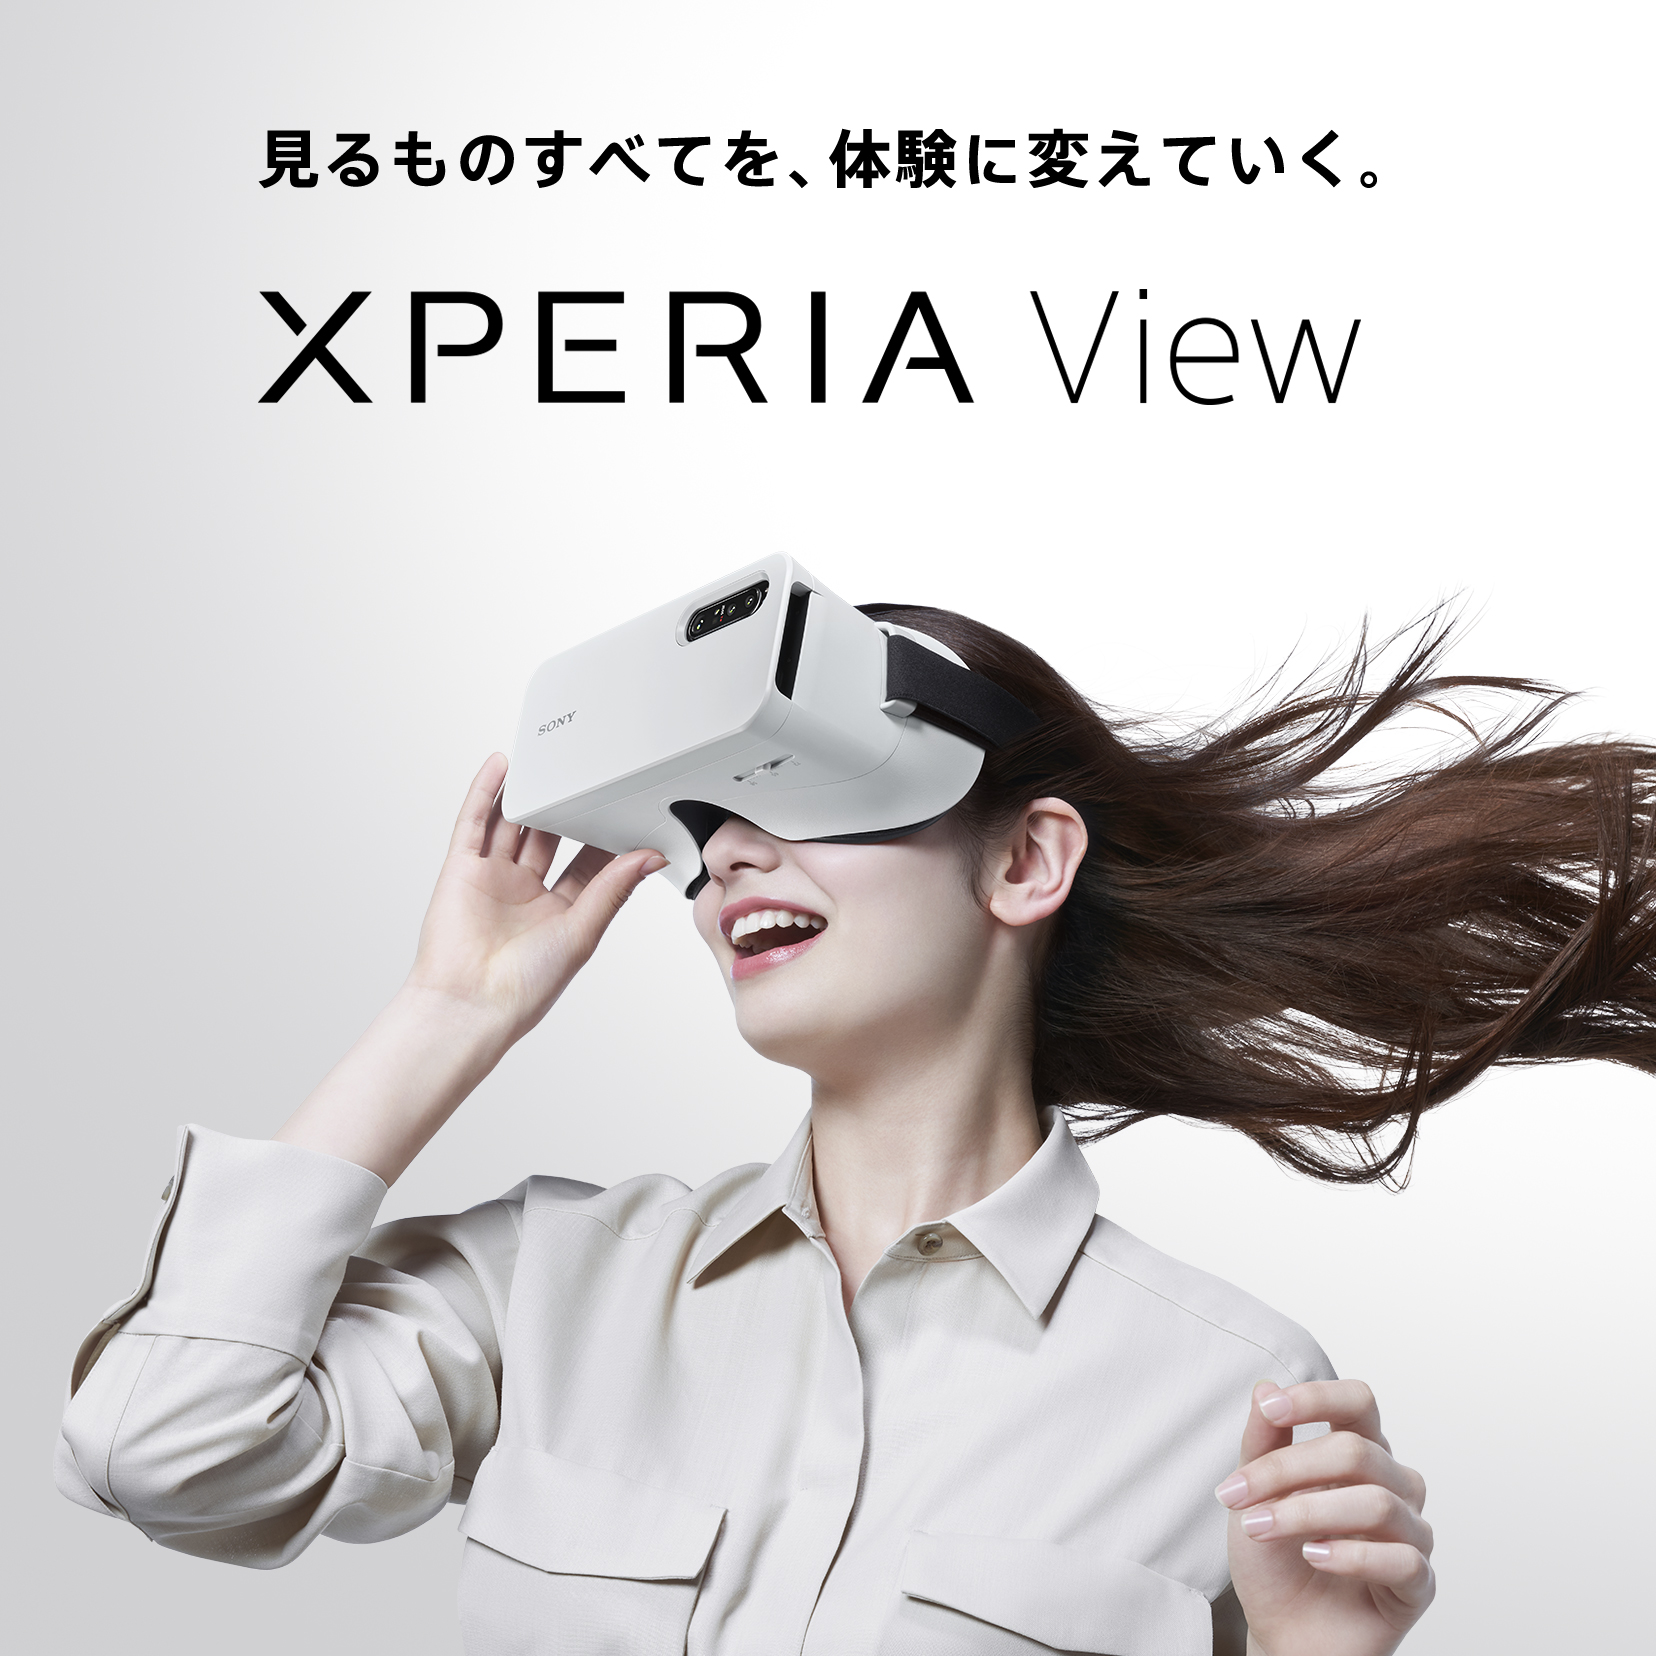 Xperia View（XQZ-VG01） - その他